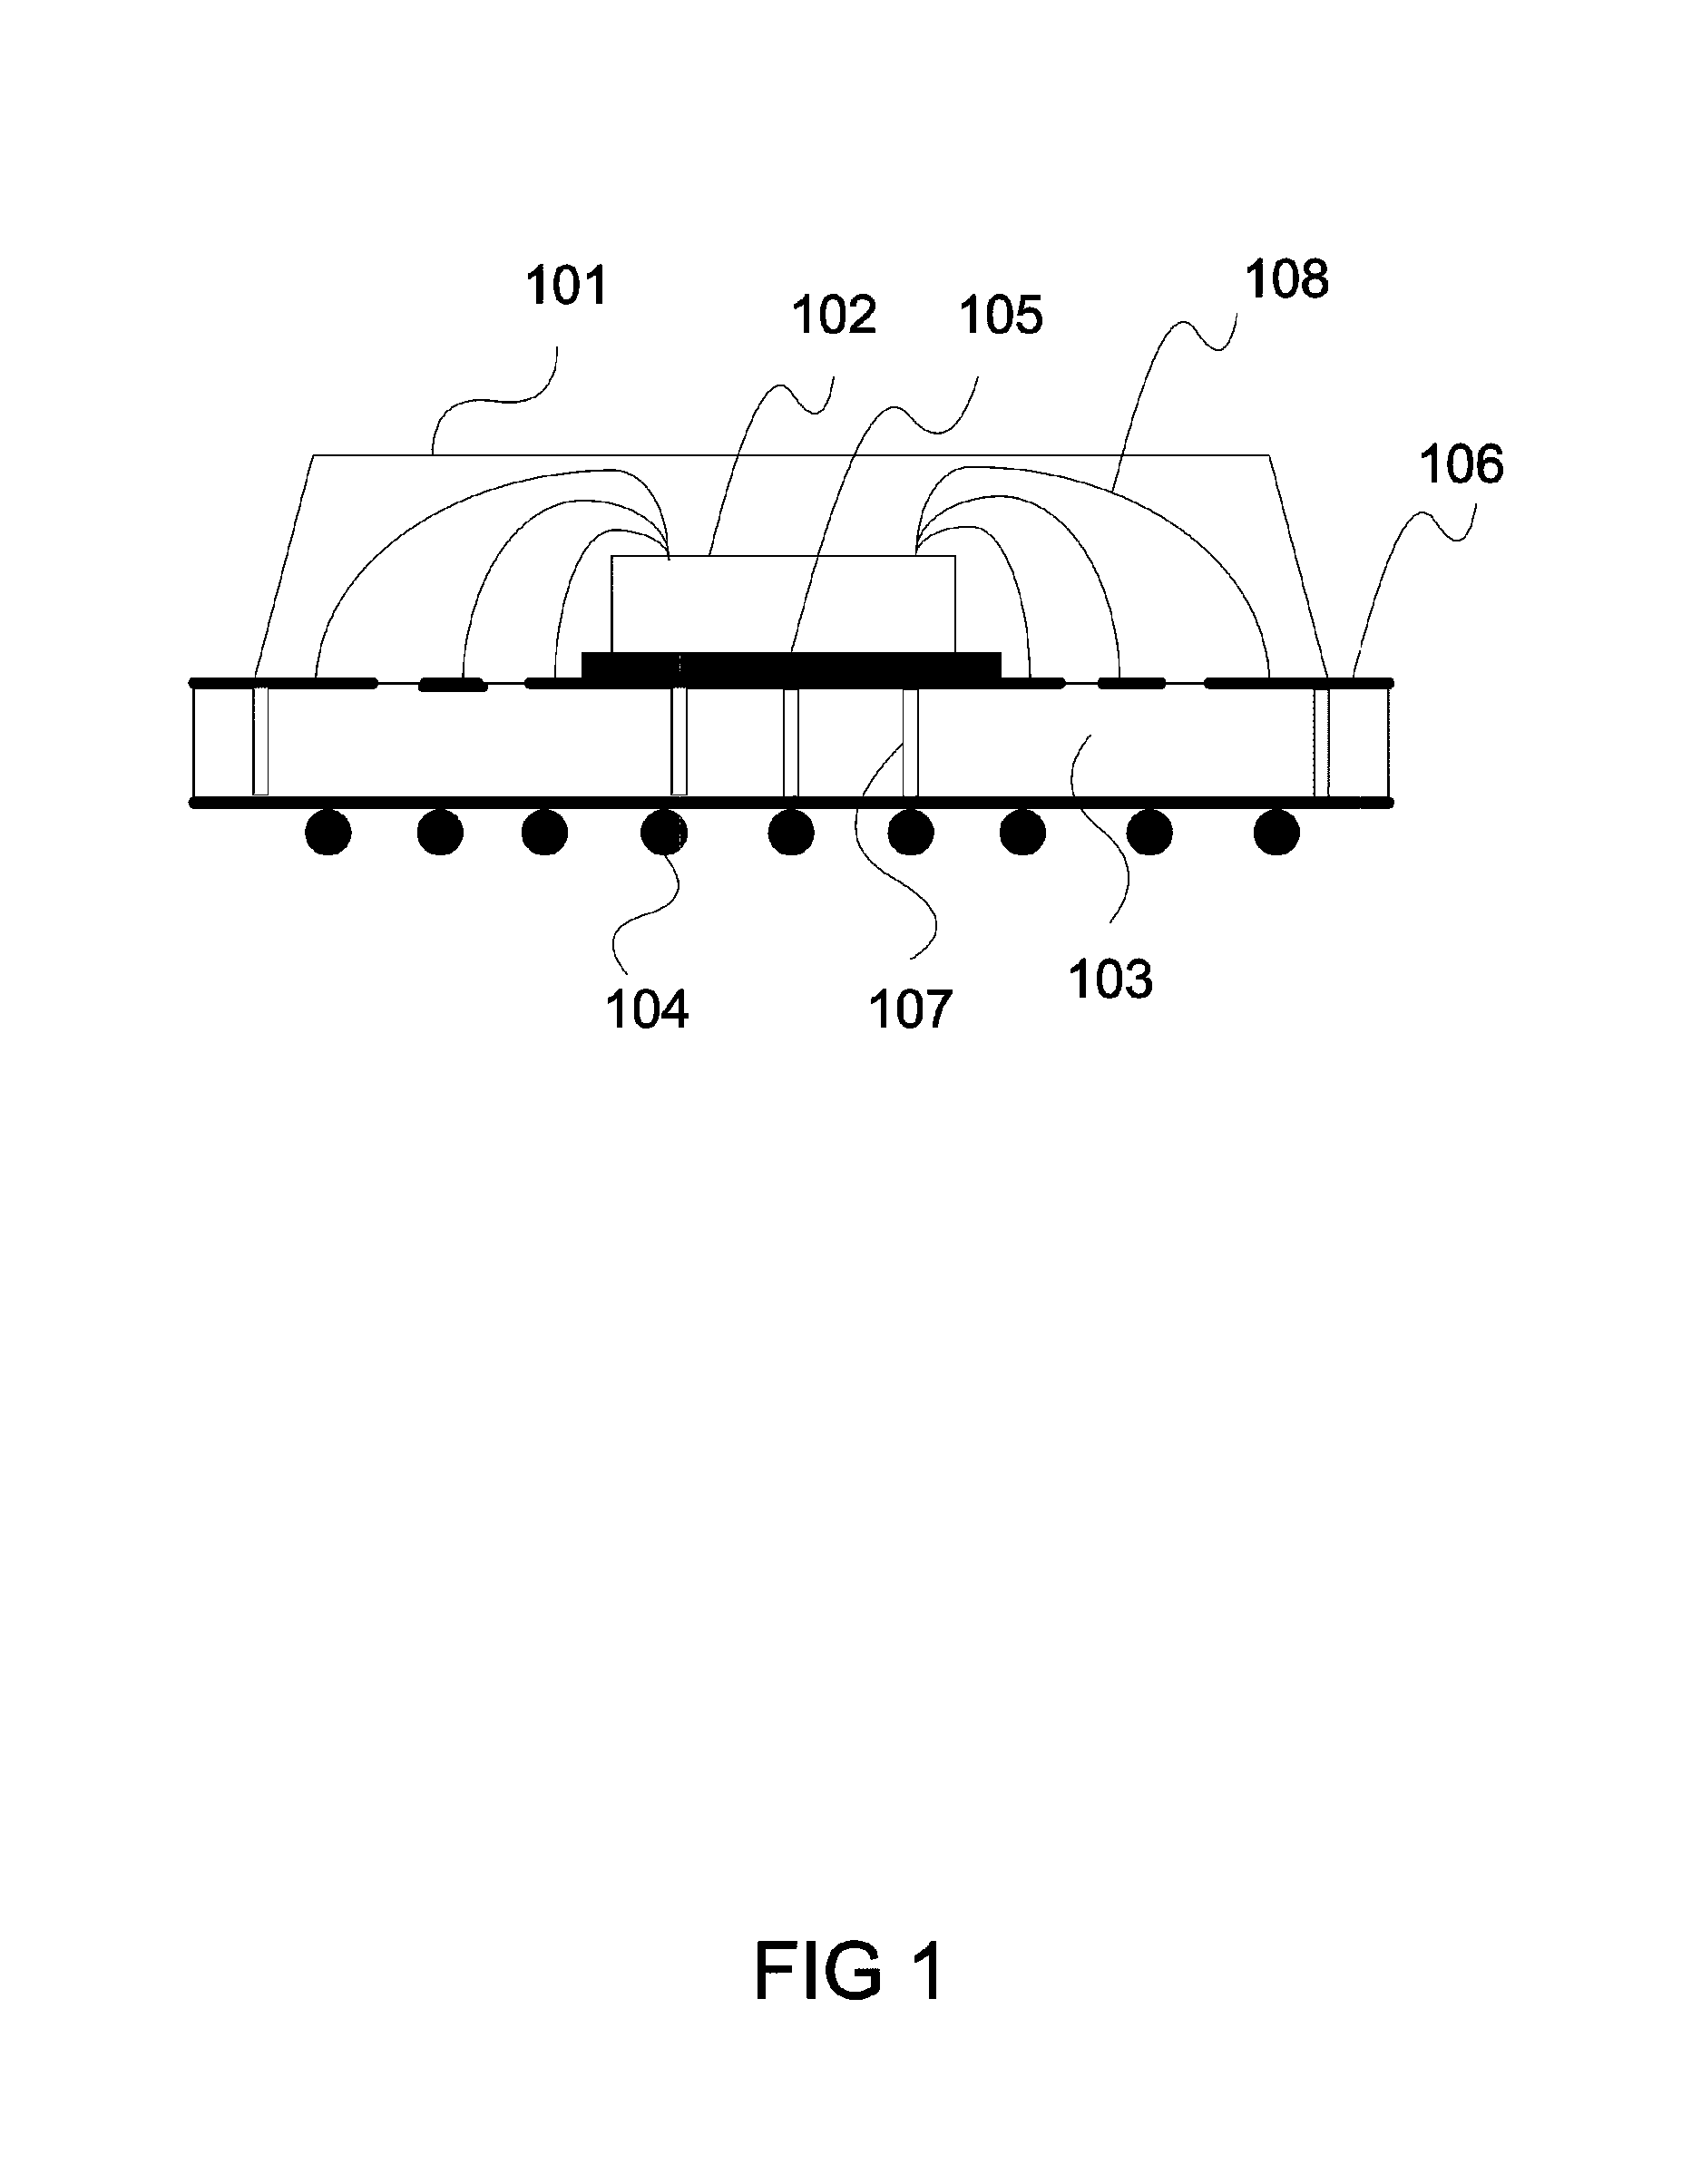 Stacking integrated circuits containing serializer and deserializer blocks using through silicon via